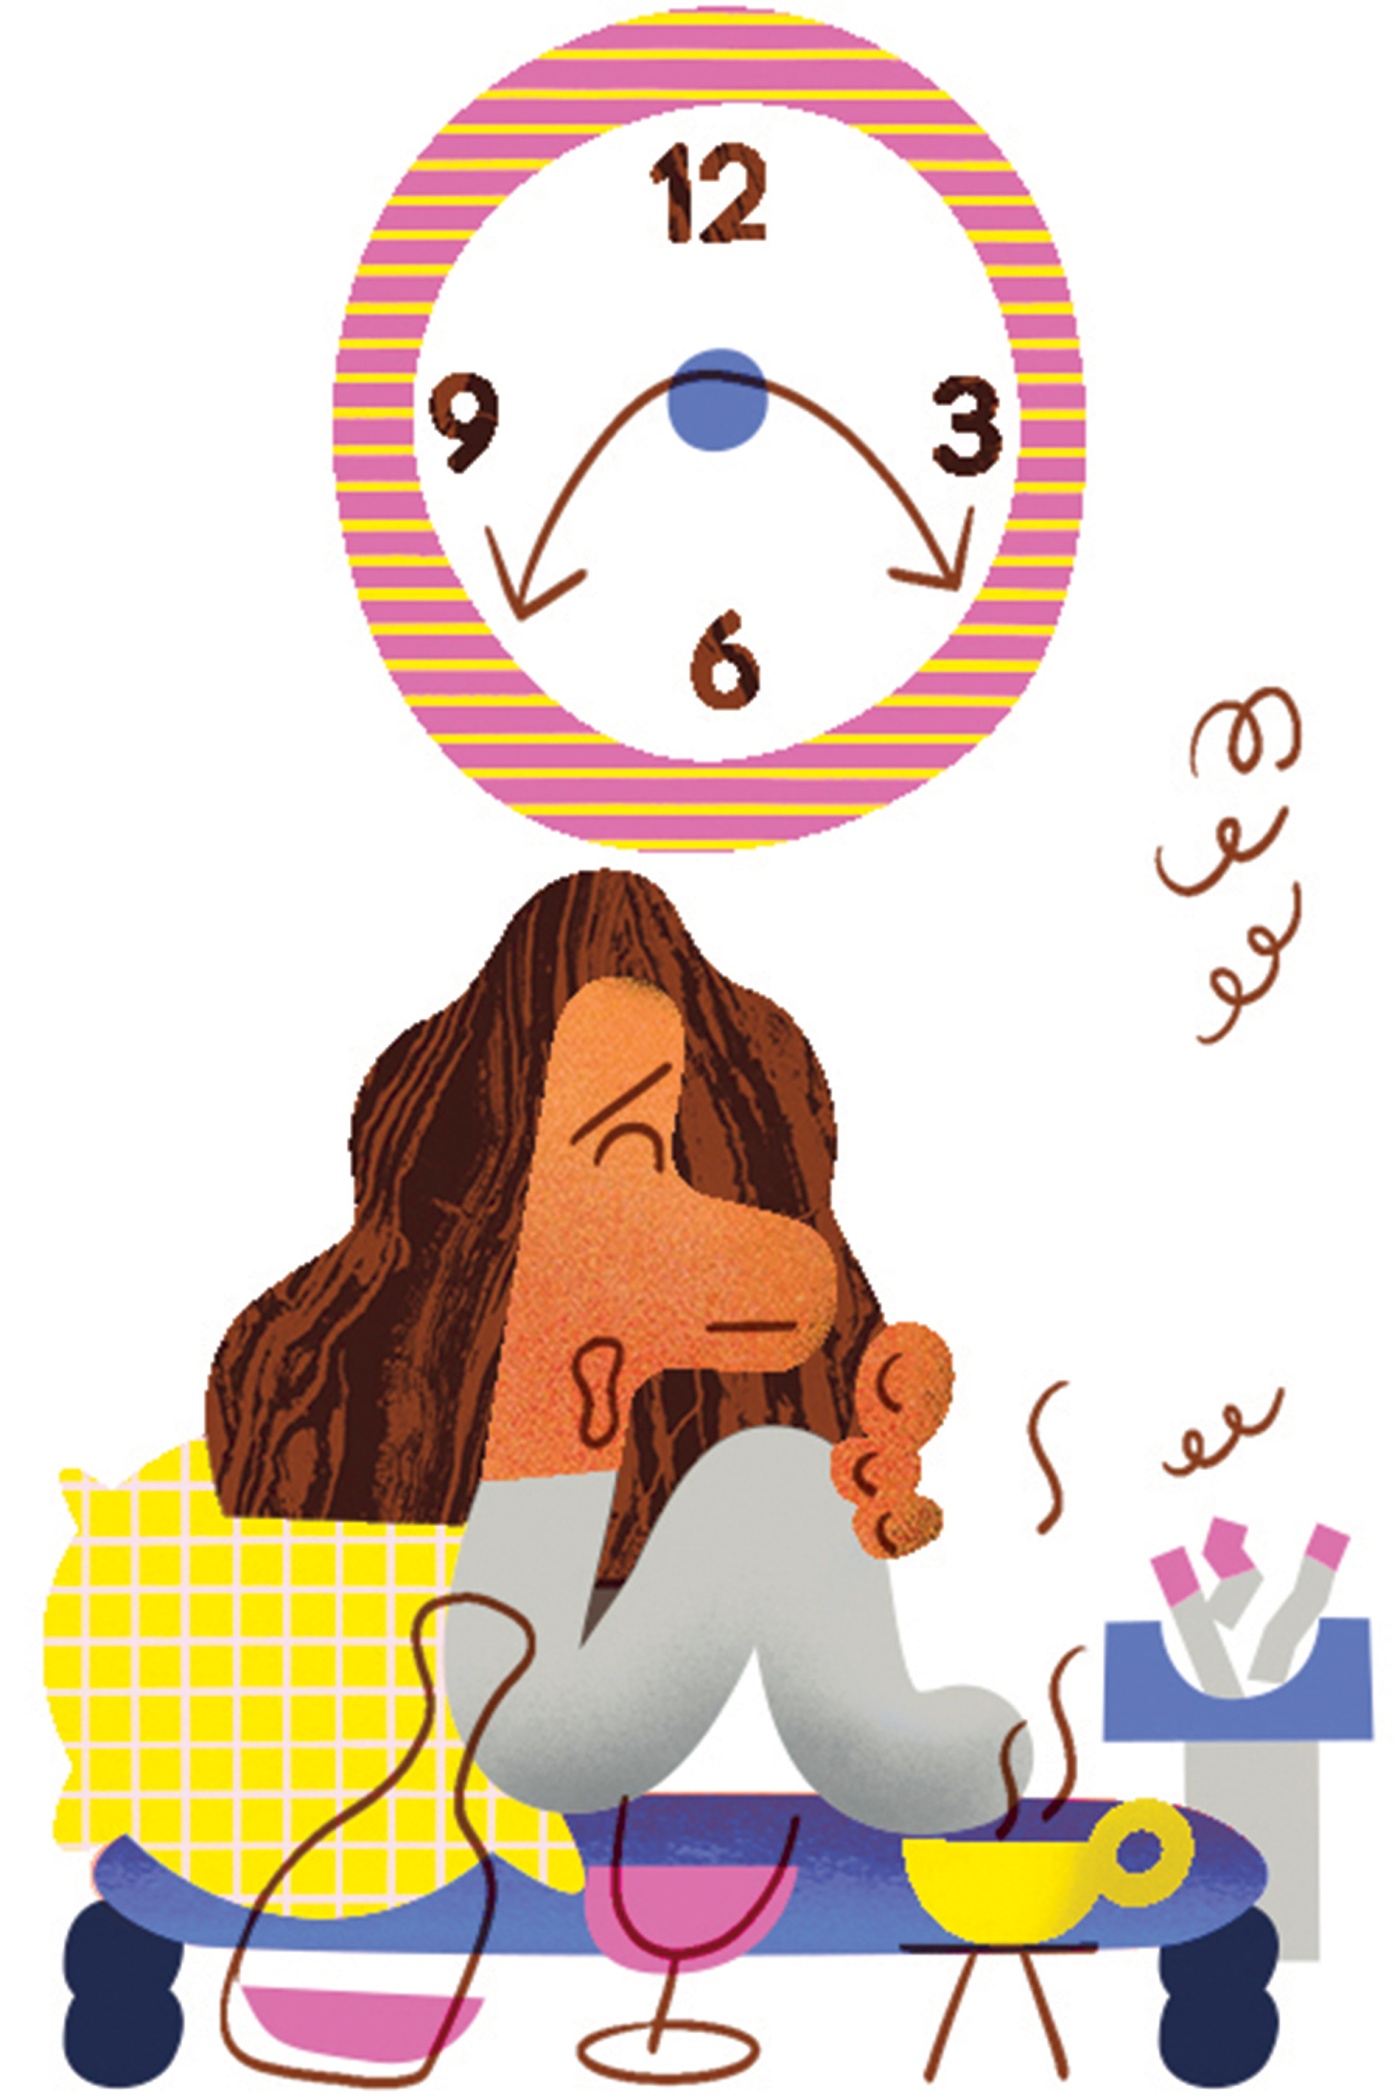 Illustration by Ola Niepsuj of a person in front of a clock and various drinks surrounding.